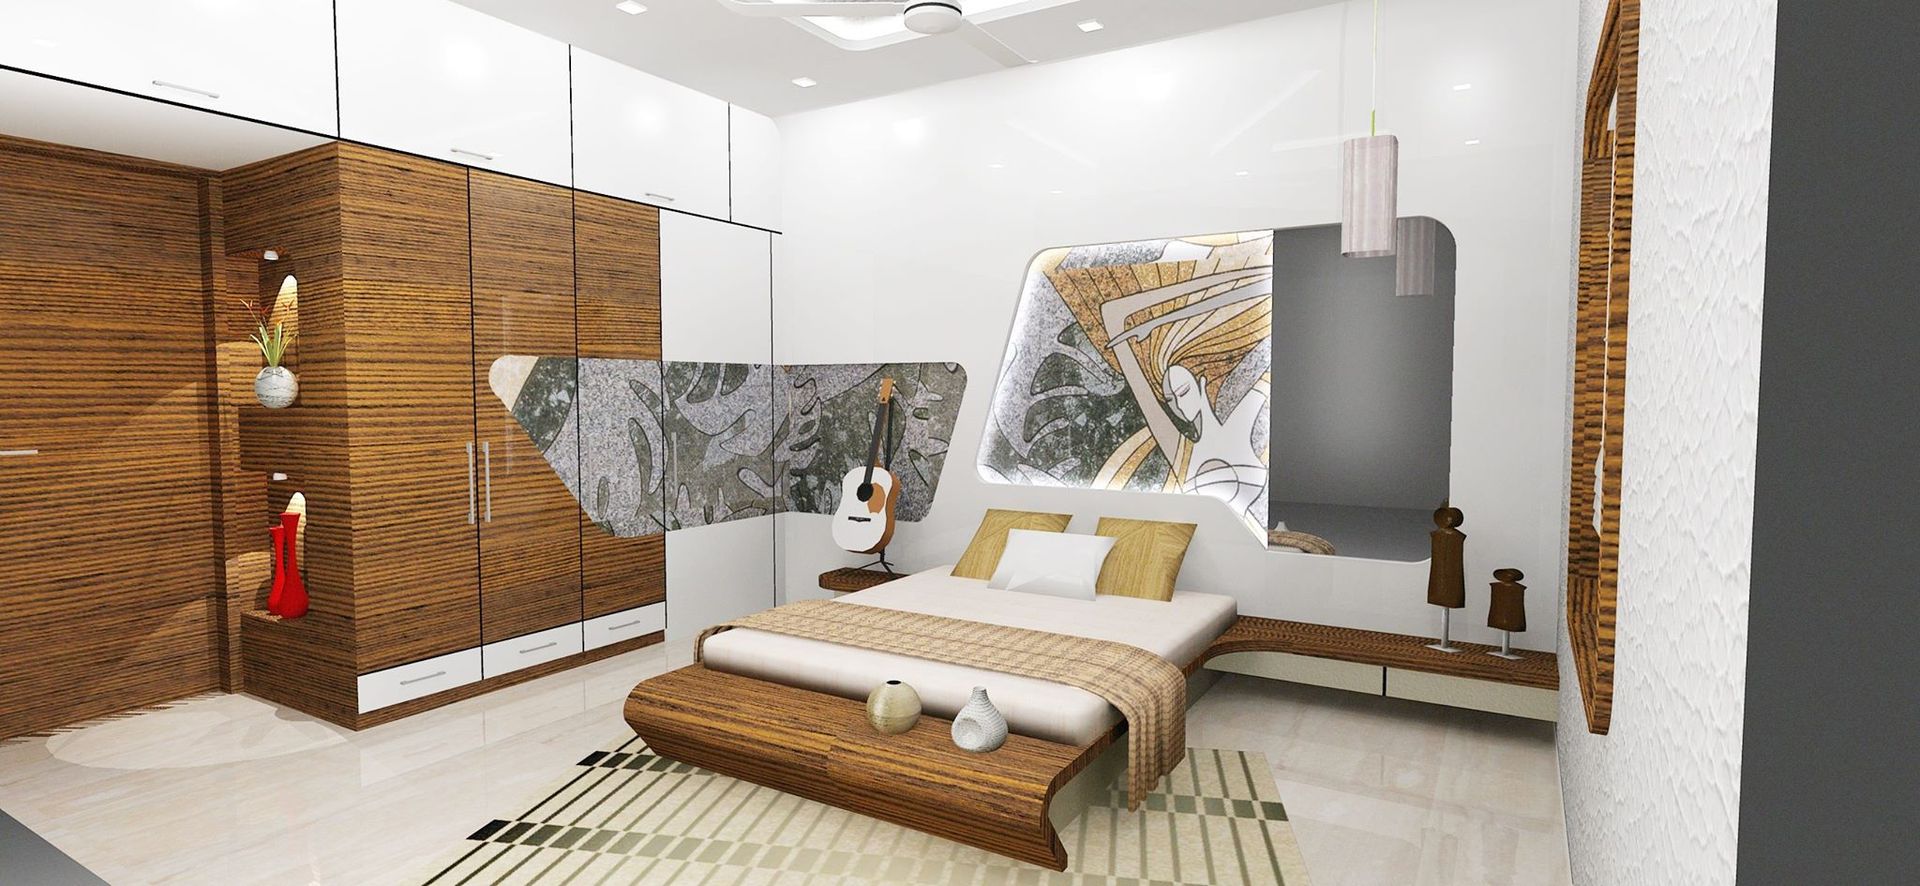 Bedroom Designs, Archsmith project consultant Archsmith project consultant Dormitorios de estilo moderno